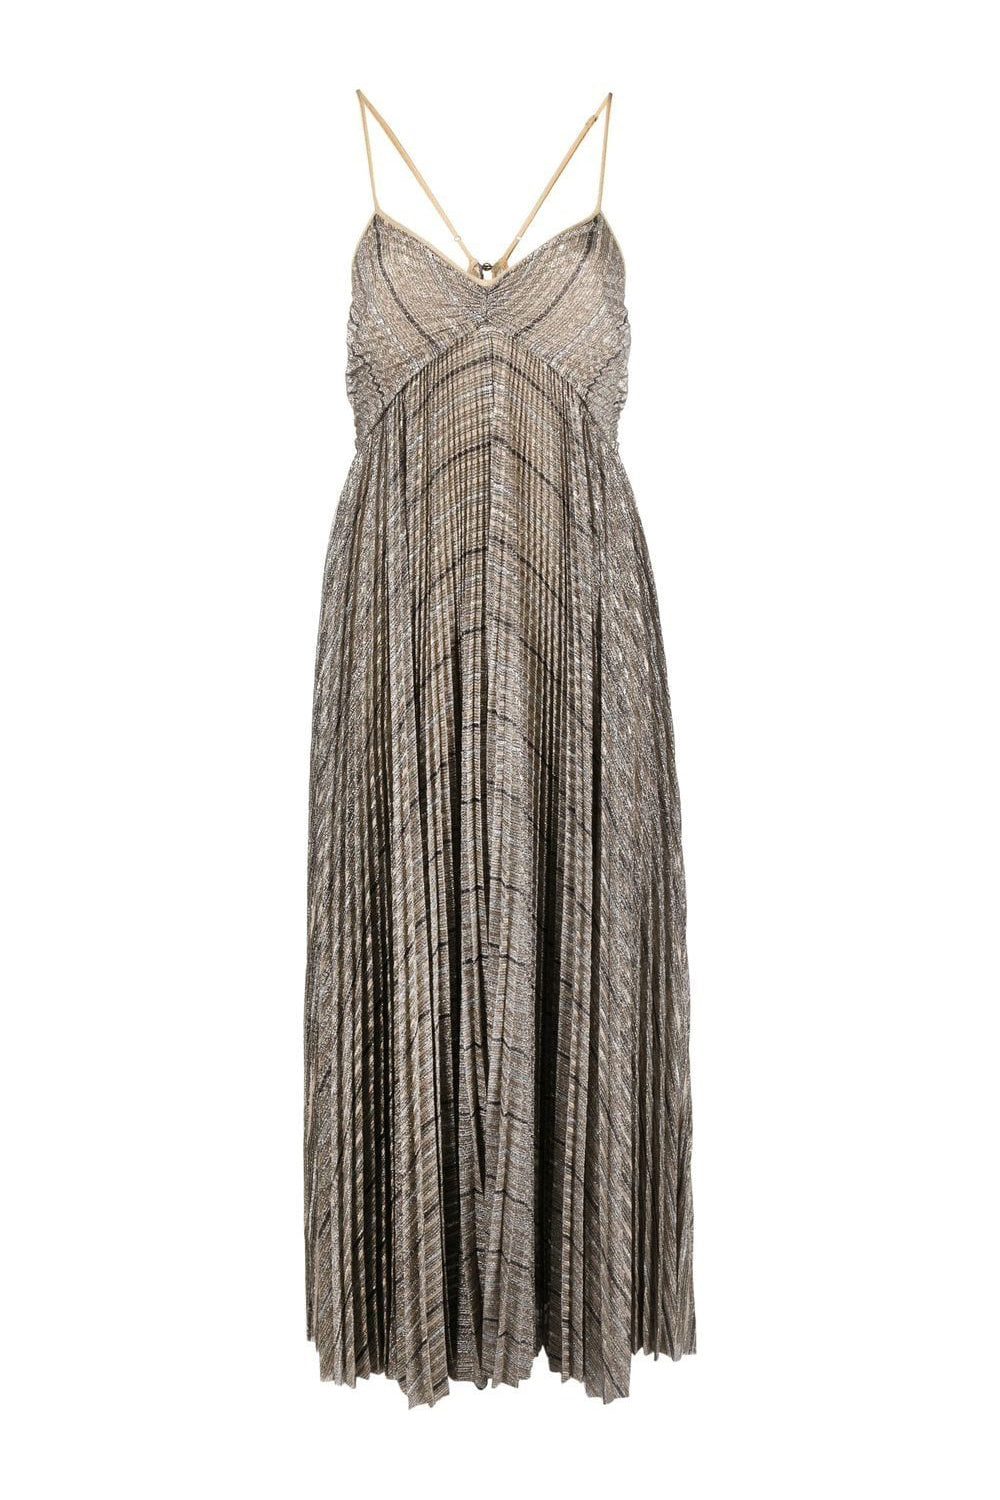 Pleated empire-line dress, gold